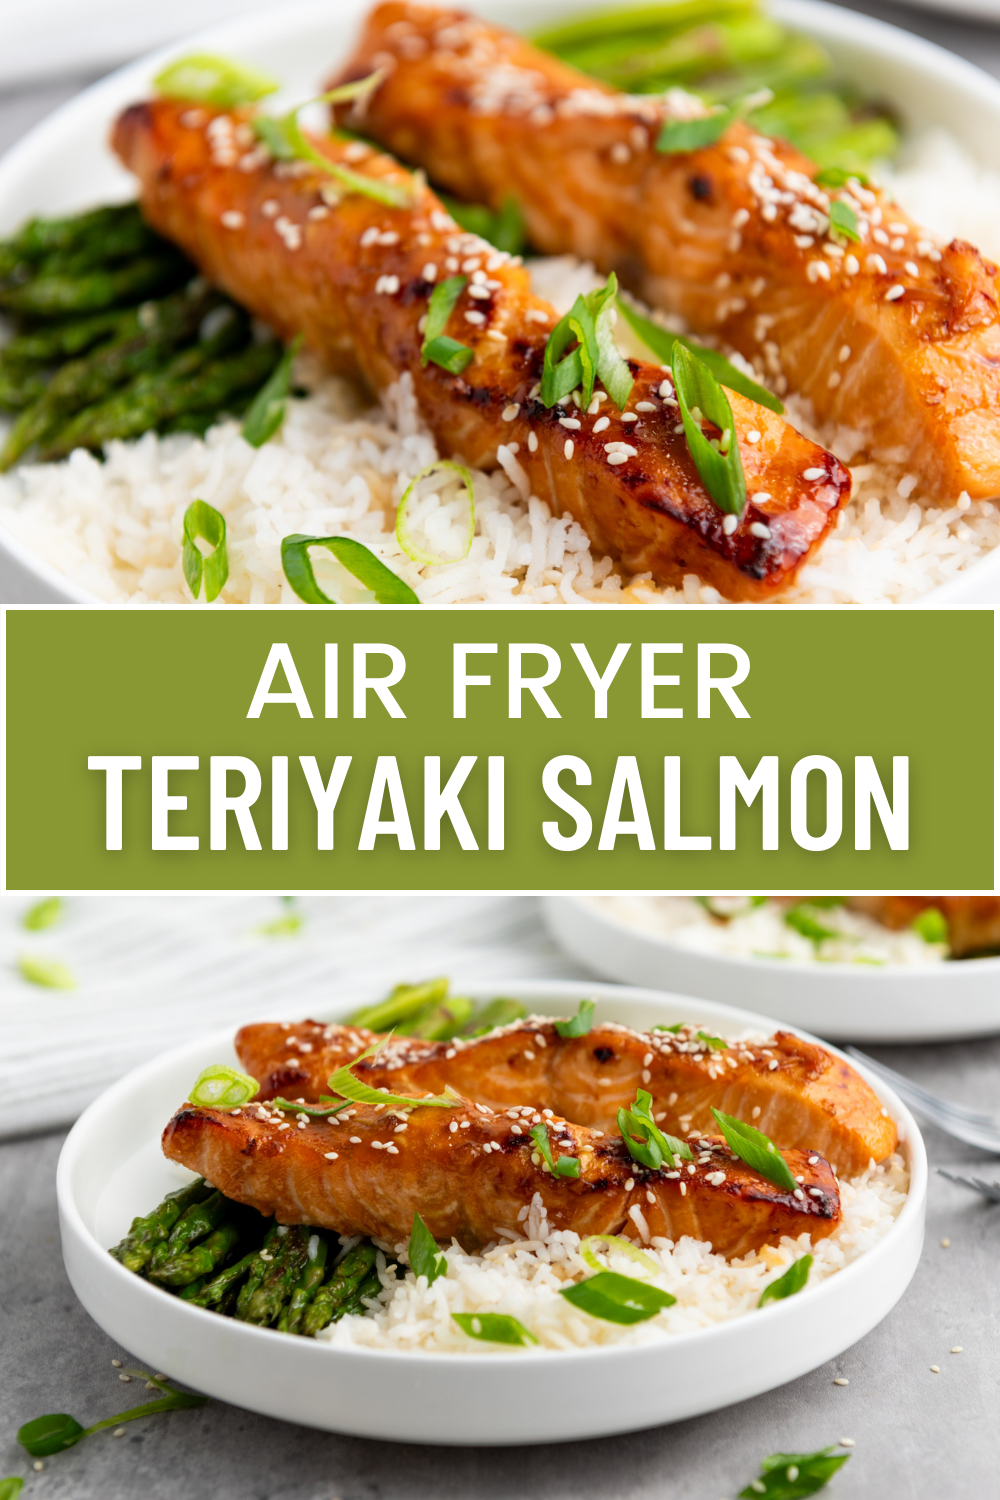 Learn how to make Air Fryer Teriyaki Salmon  - a healthy, protein-packed meal that comes together SO easily and quickly in the air fryer!